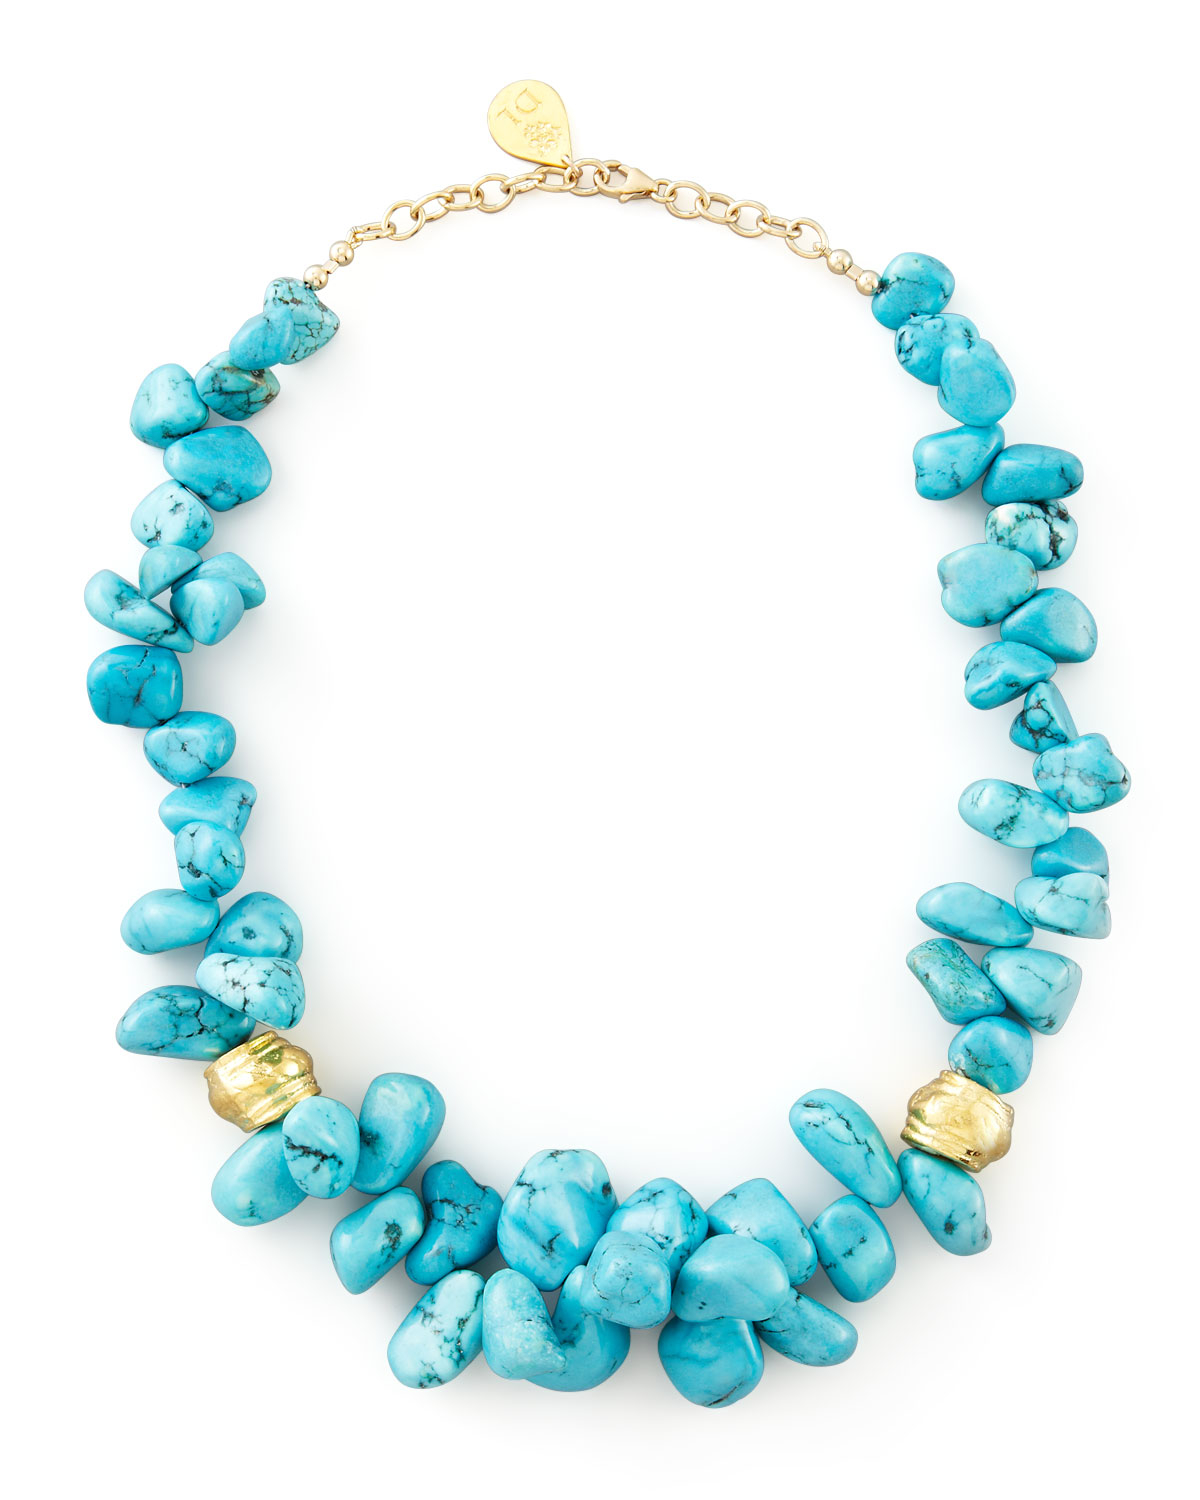 Devon Leigh Turquoise Cluster Beaded Necklace in Blue - Lyst